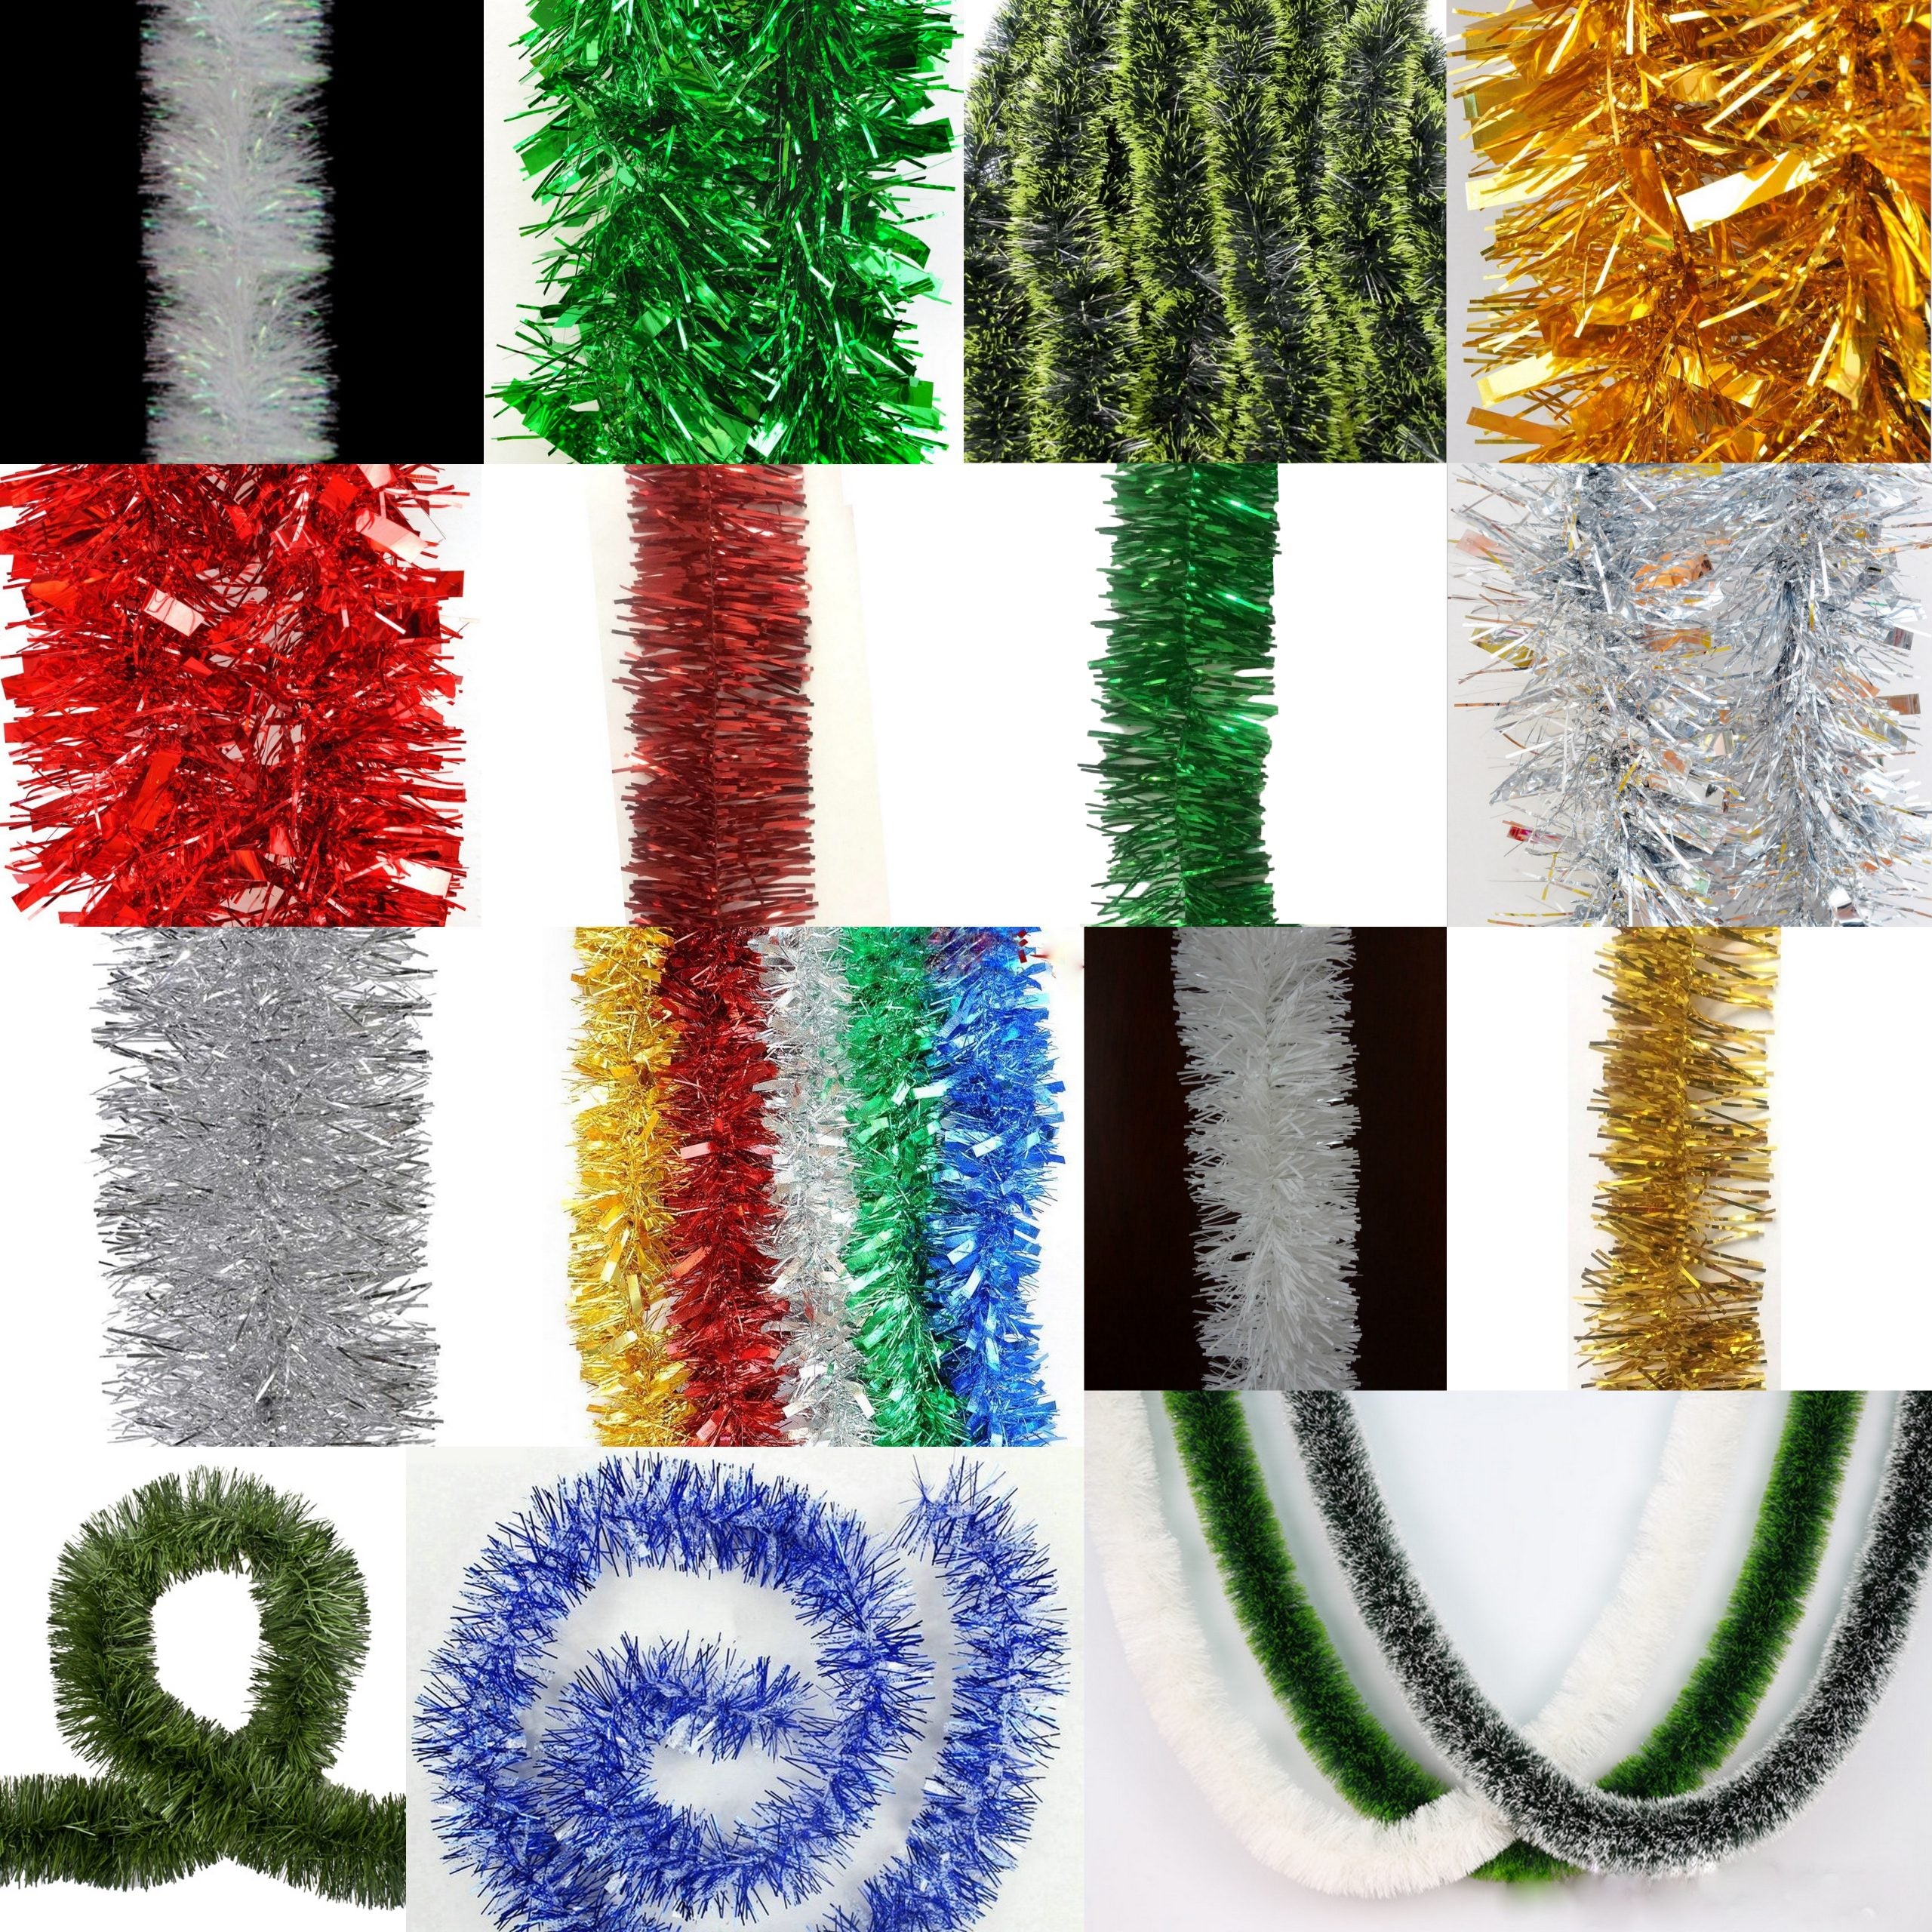 5x 2.5m Christmas Tinsel Xmas Garland Sparkly Snowflake Party Natural Home Décor, Snow Tips in Green - SILBERSHELL